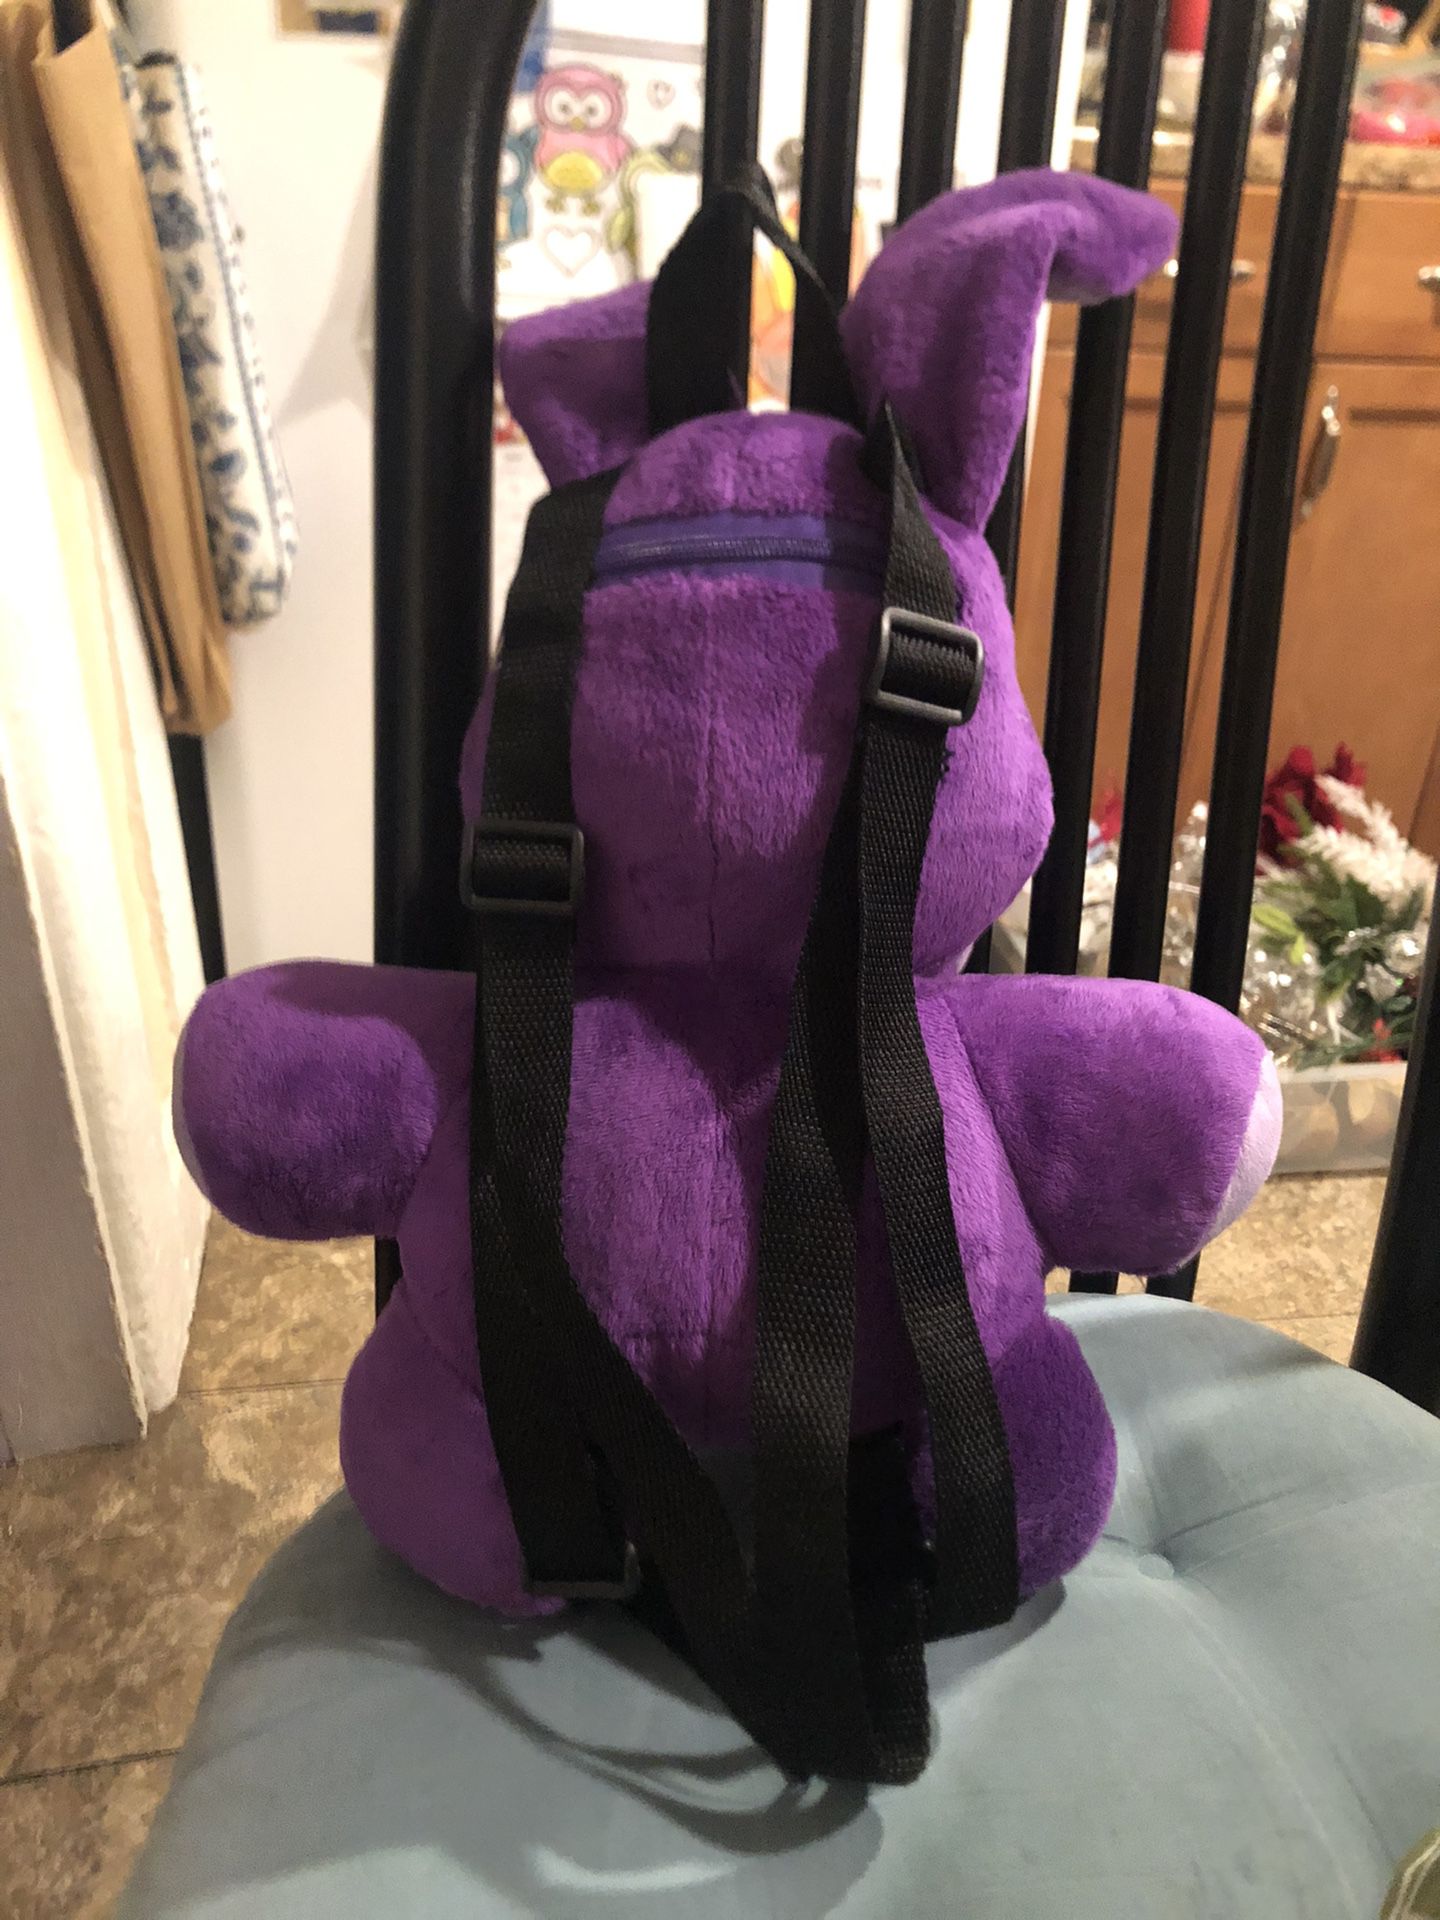 Fnaf Plush/Bonnie/Small Bag In The Back for Sale in Wappingers Fl